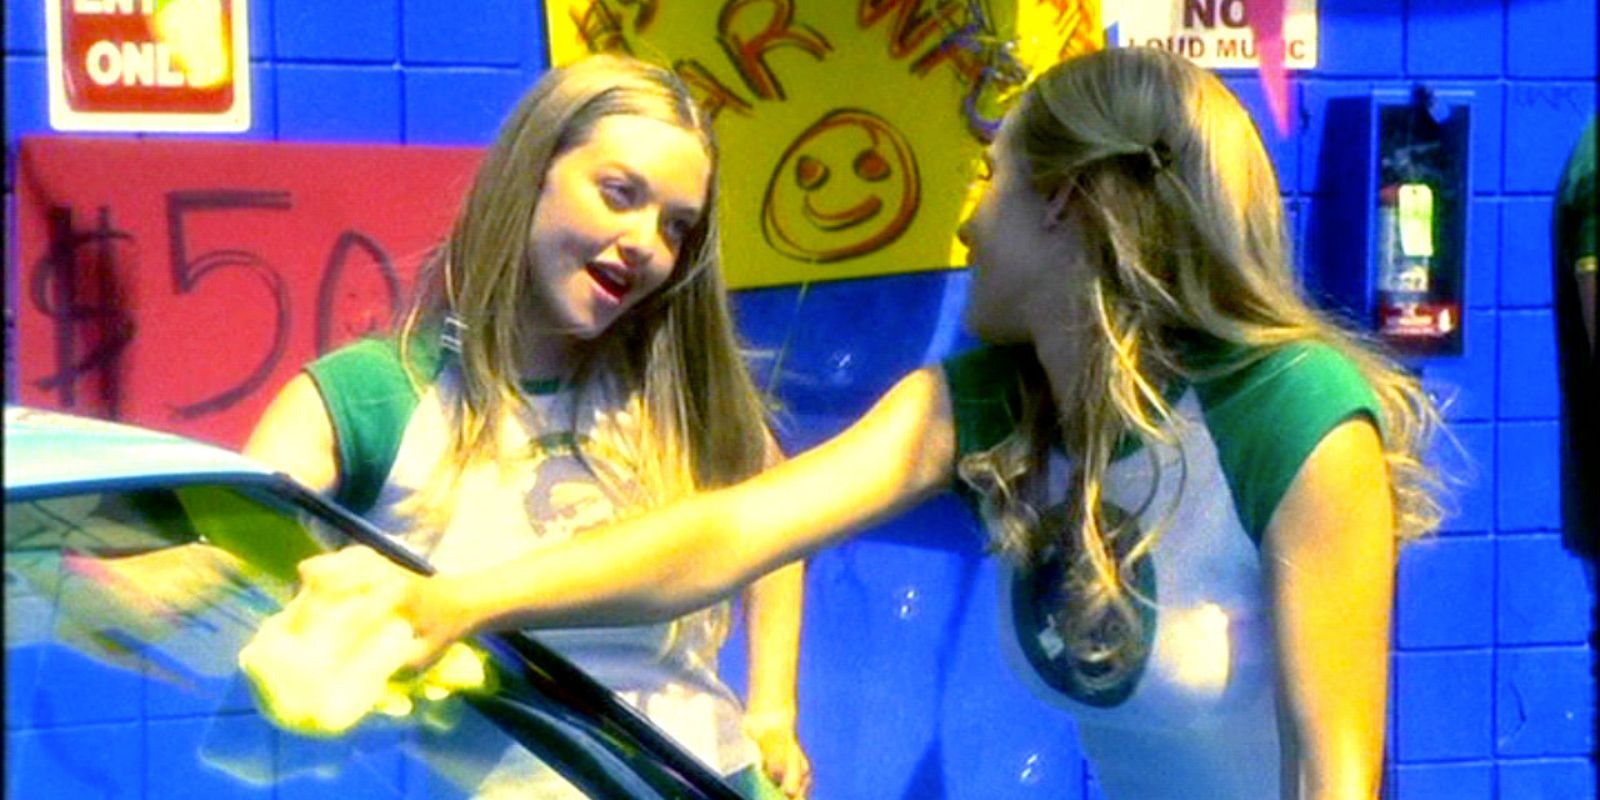 Veronica and Lily at car wash